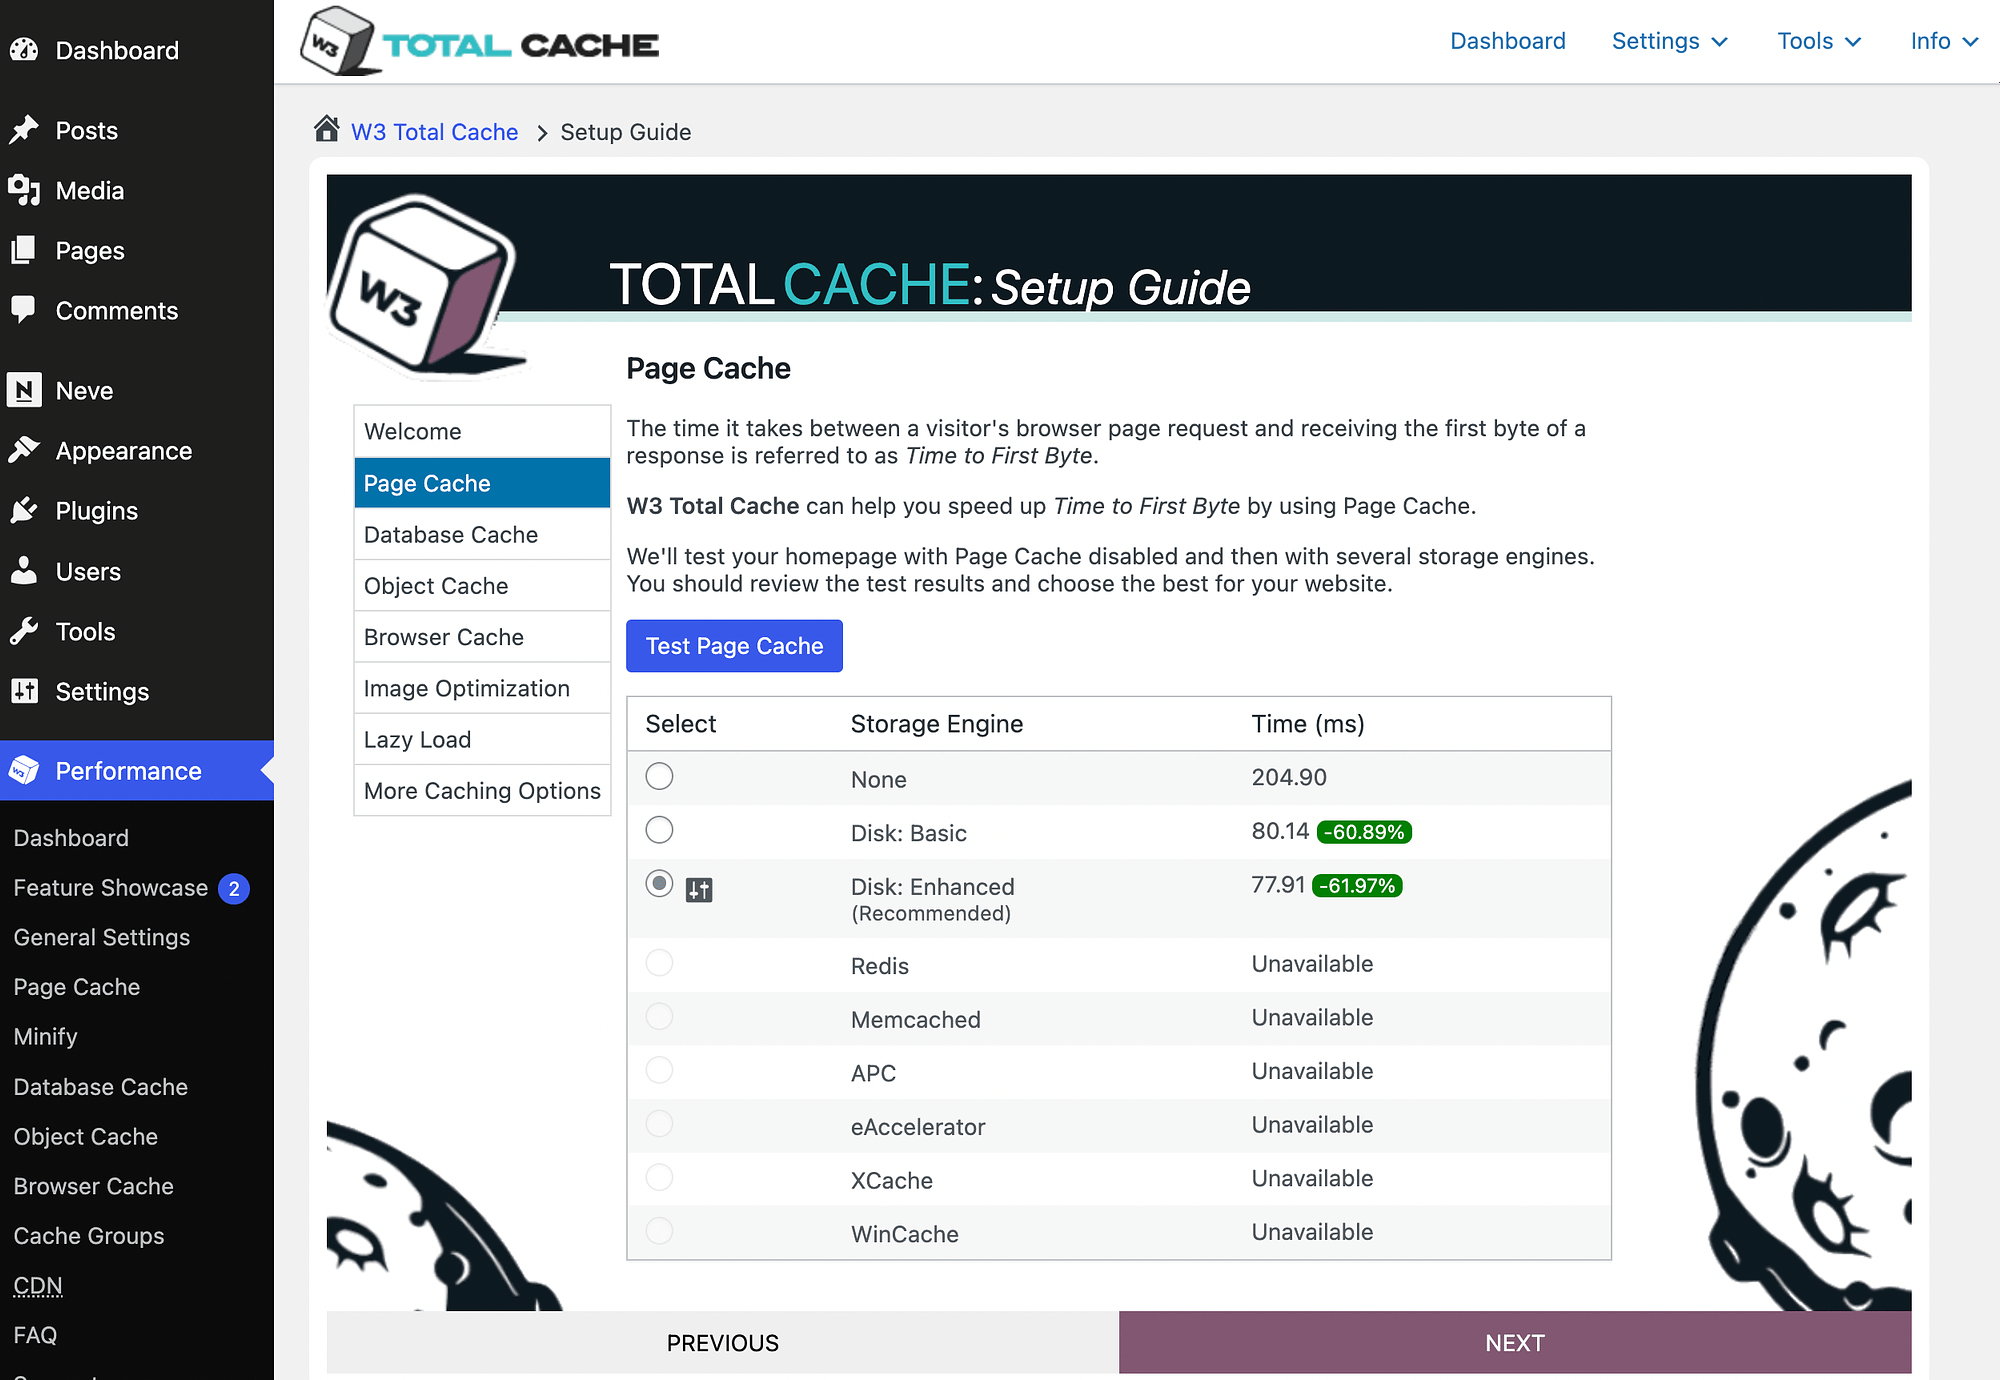 Testing your page cache in W3 Total Cache.